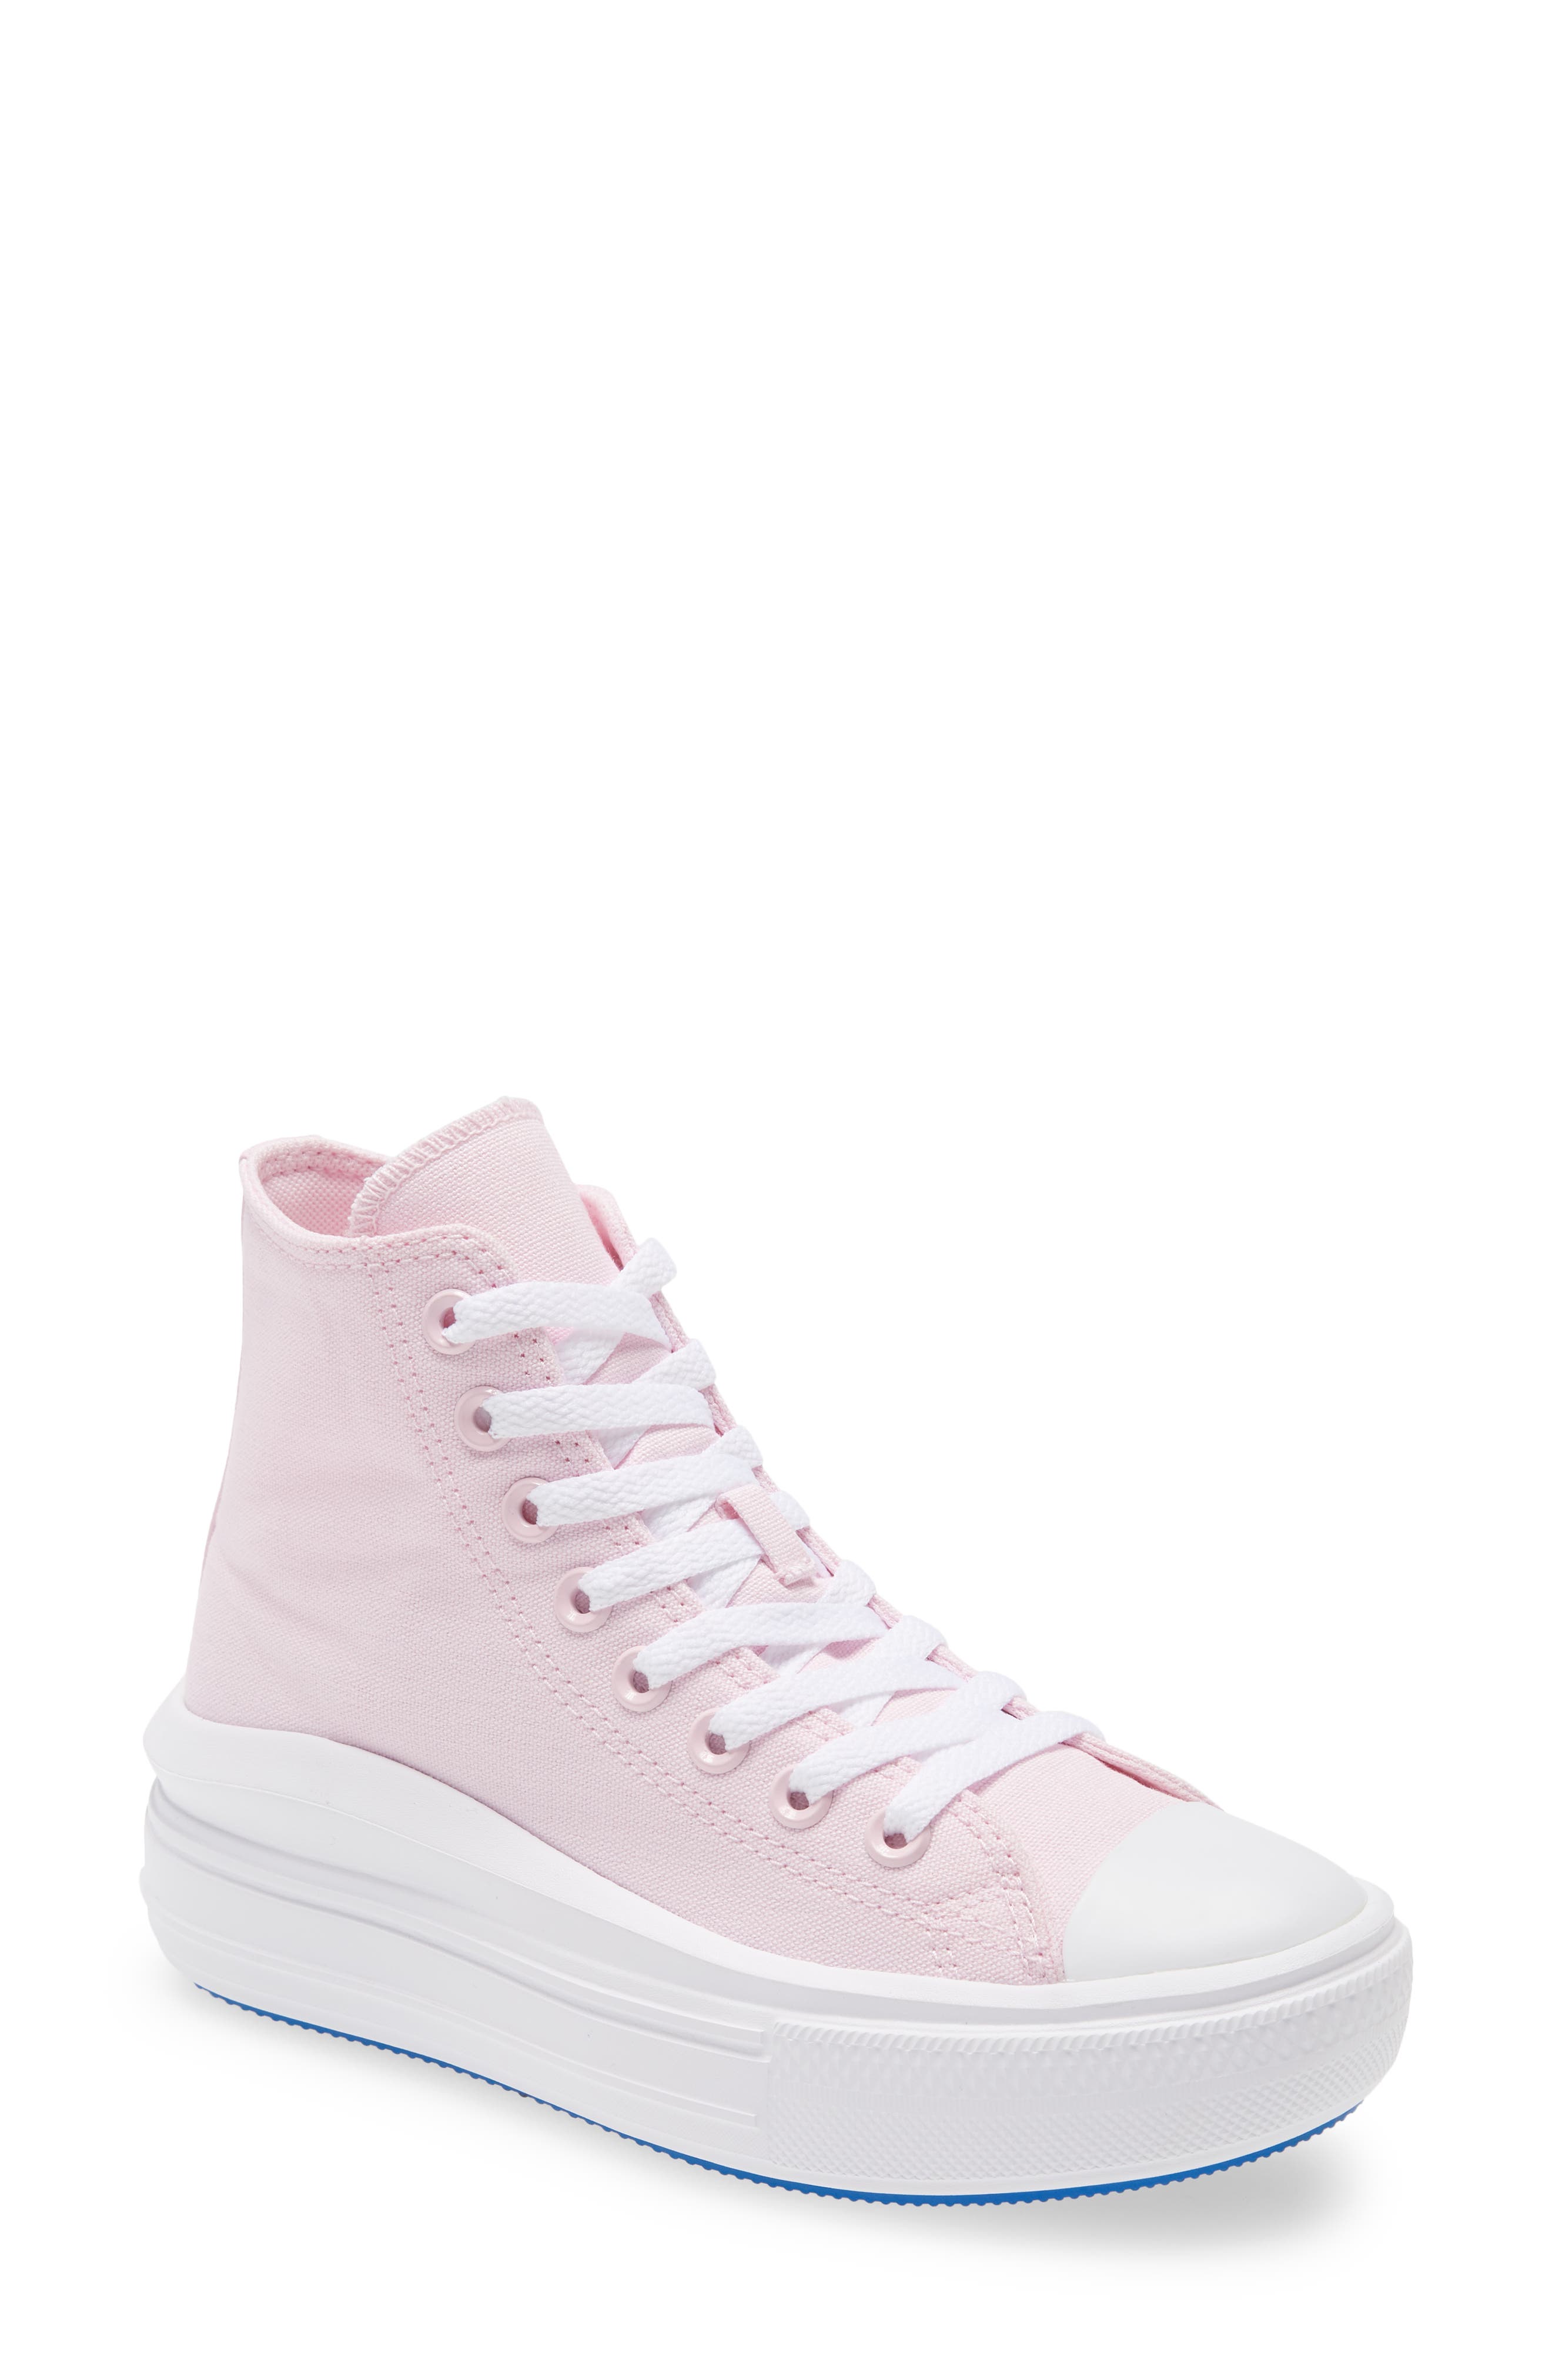 converse all pink